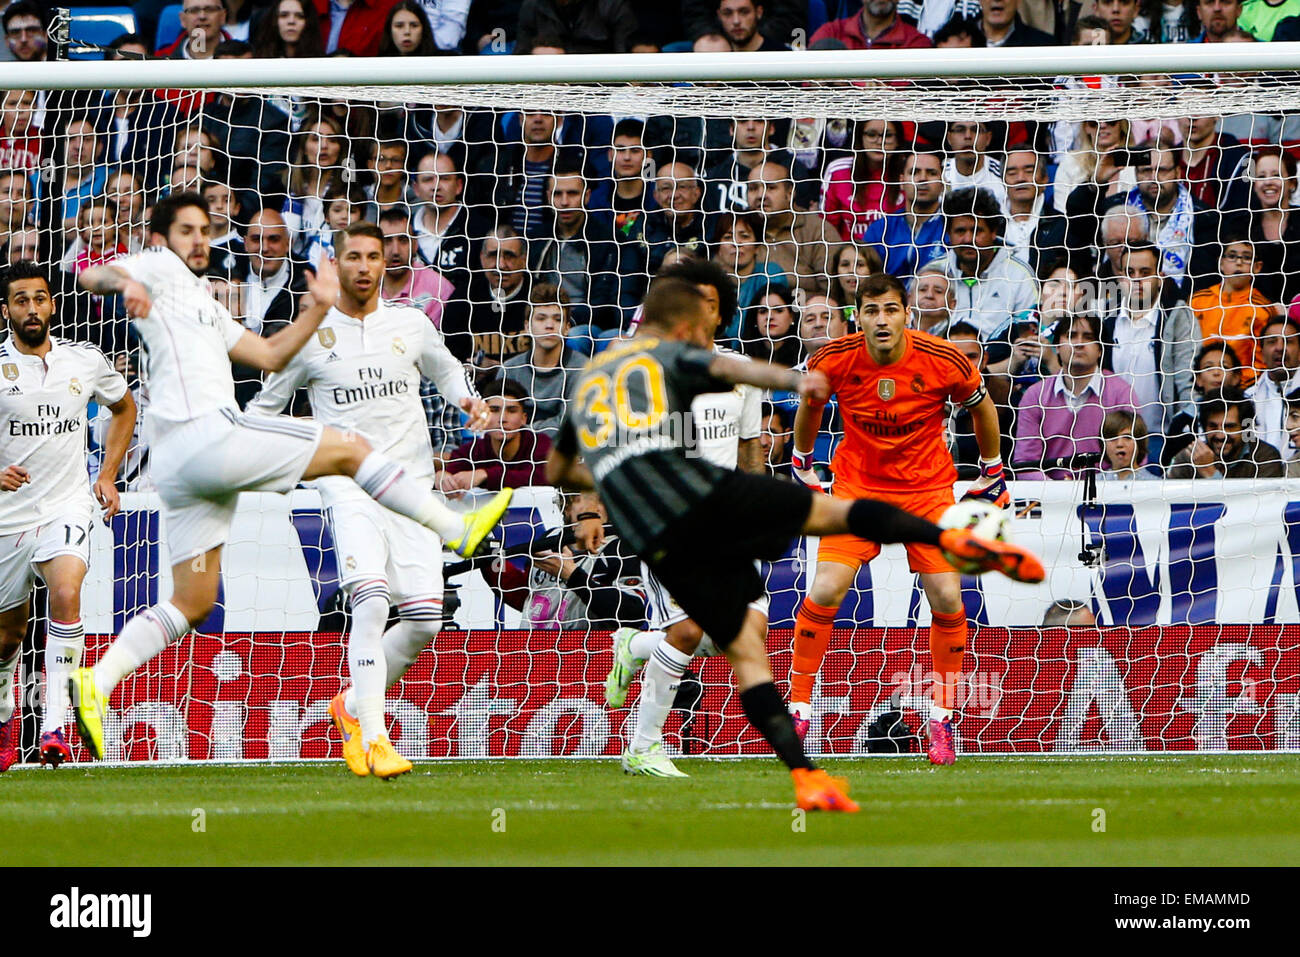 Madrid, Spain. 18th April, 2015. La Liga football. Real Madrid versus Malaga. Iker Casillas Fernandez Goalkeeper of Real Madrid about to make the save Credit:  Action Plus Sports Images/Alamy Live News Stock Photo